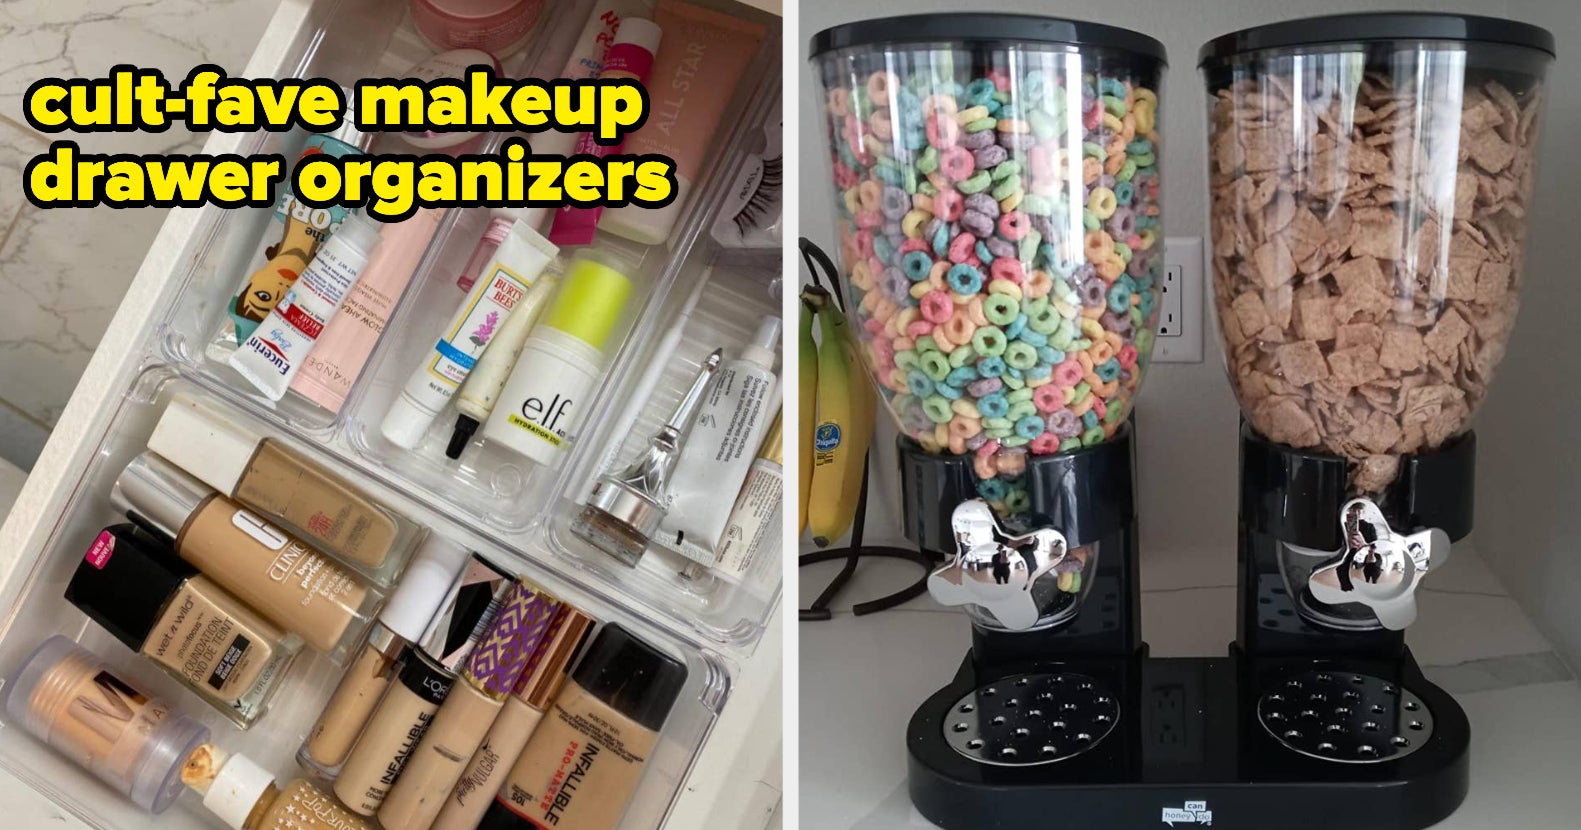 TikTok Home Organisation Must-Haves From As Low As $5.99